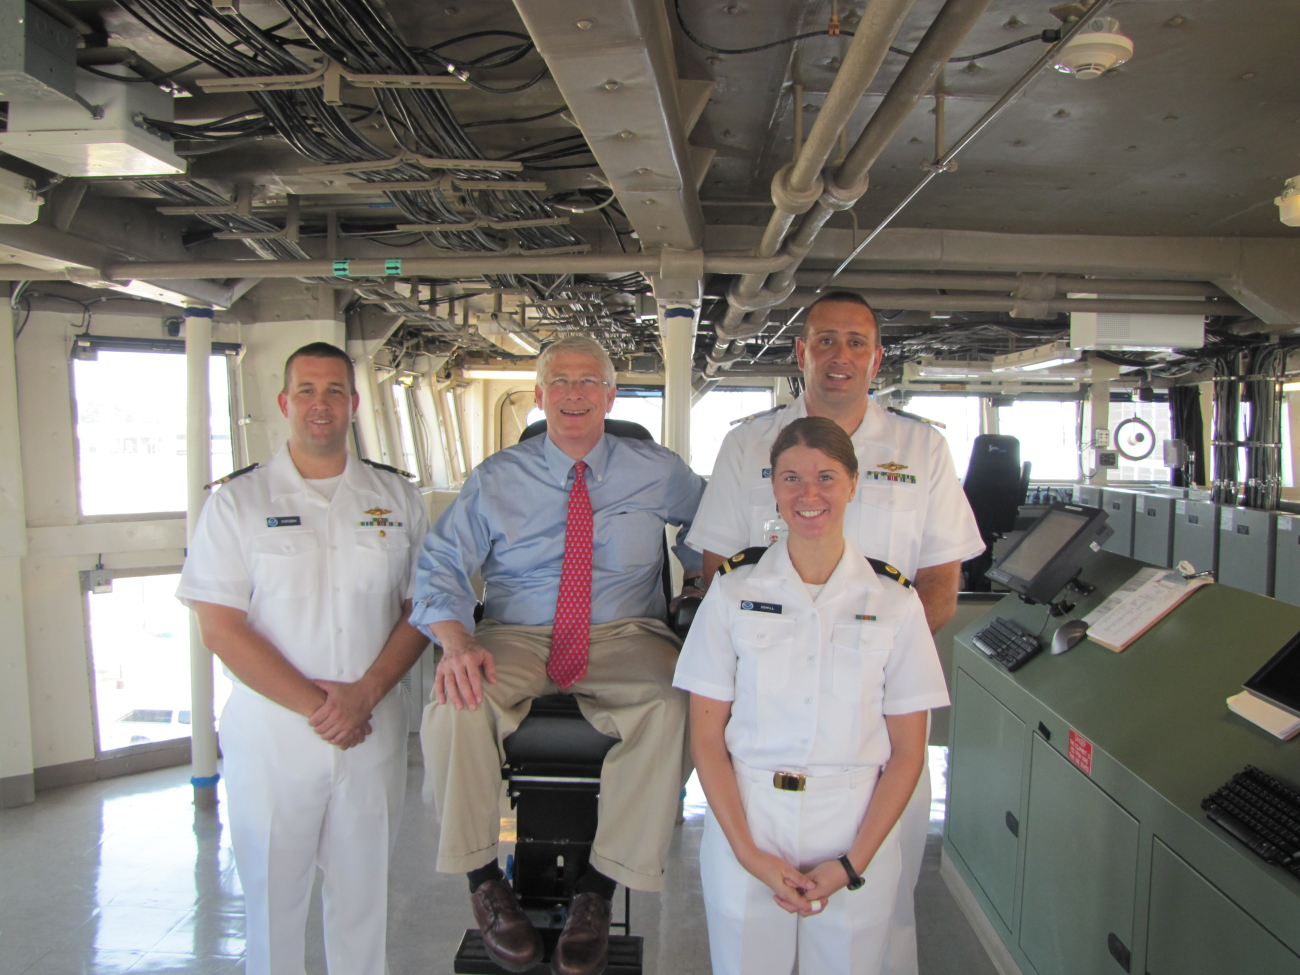 Commander Jeremy Adams, commanding officer of NOAA Ship PISCES atright rear, Ensign Schill, right front, Lieutenant CommanderChrobak, Executive officer, and Fisheries official in captain's chair of NOAAShip PISCES